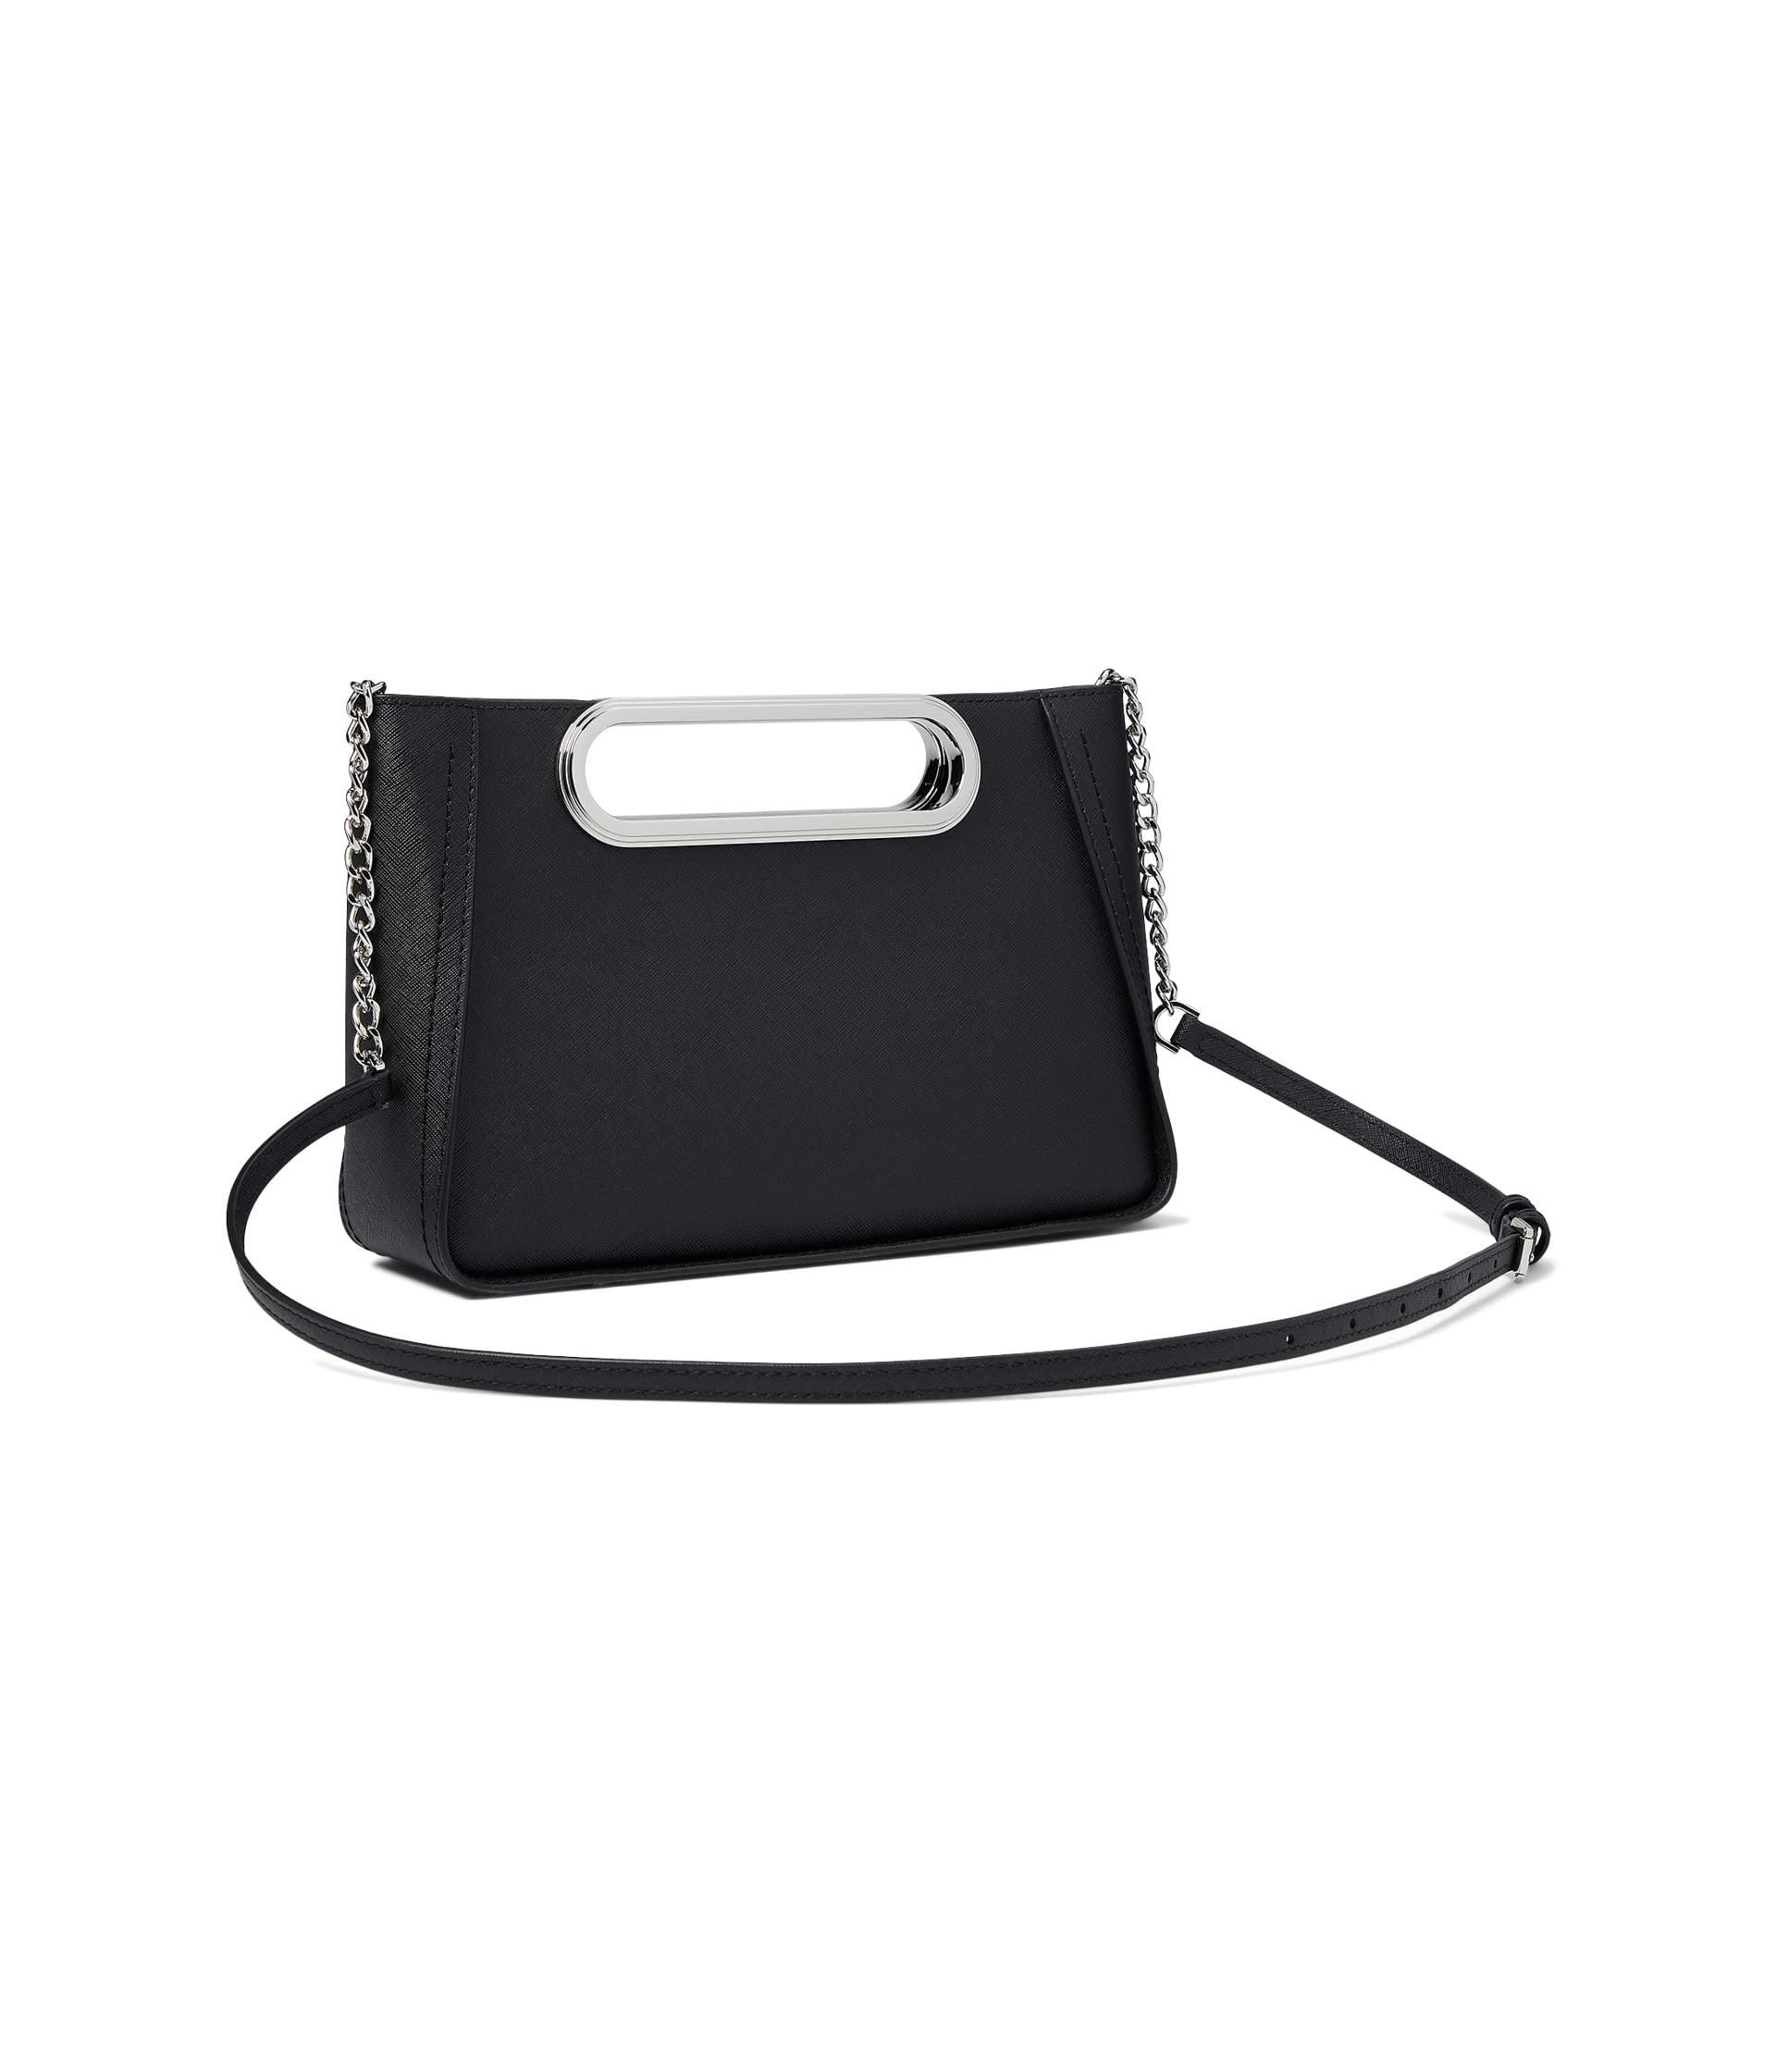 Chelsea Large Saffiano Leather Convertible Crossbody Bag